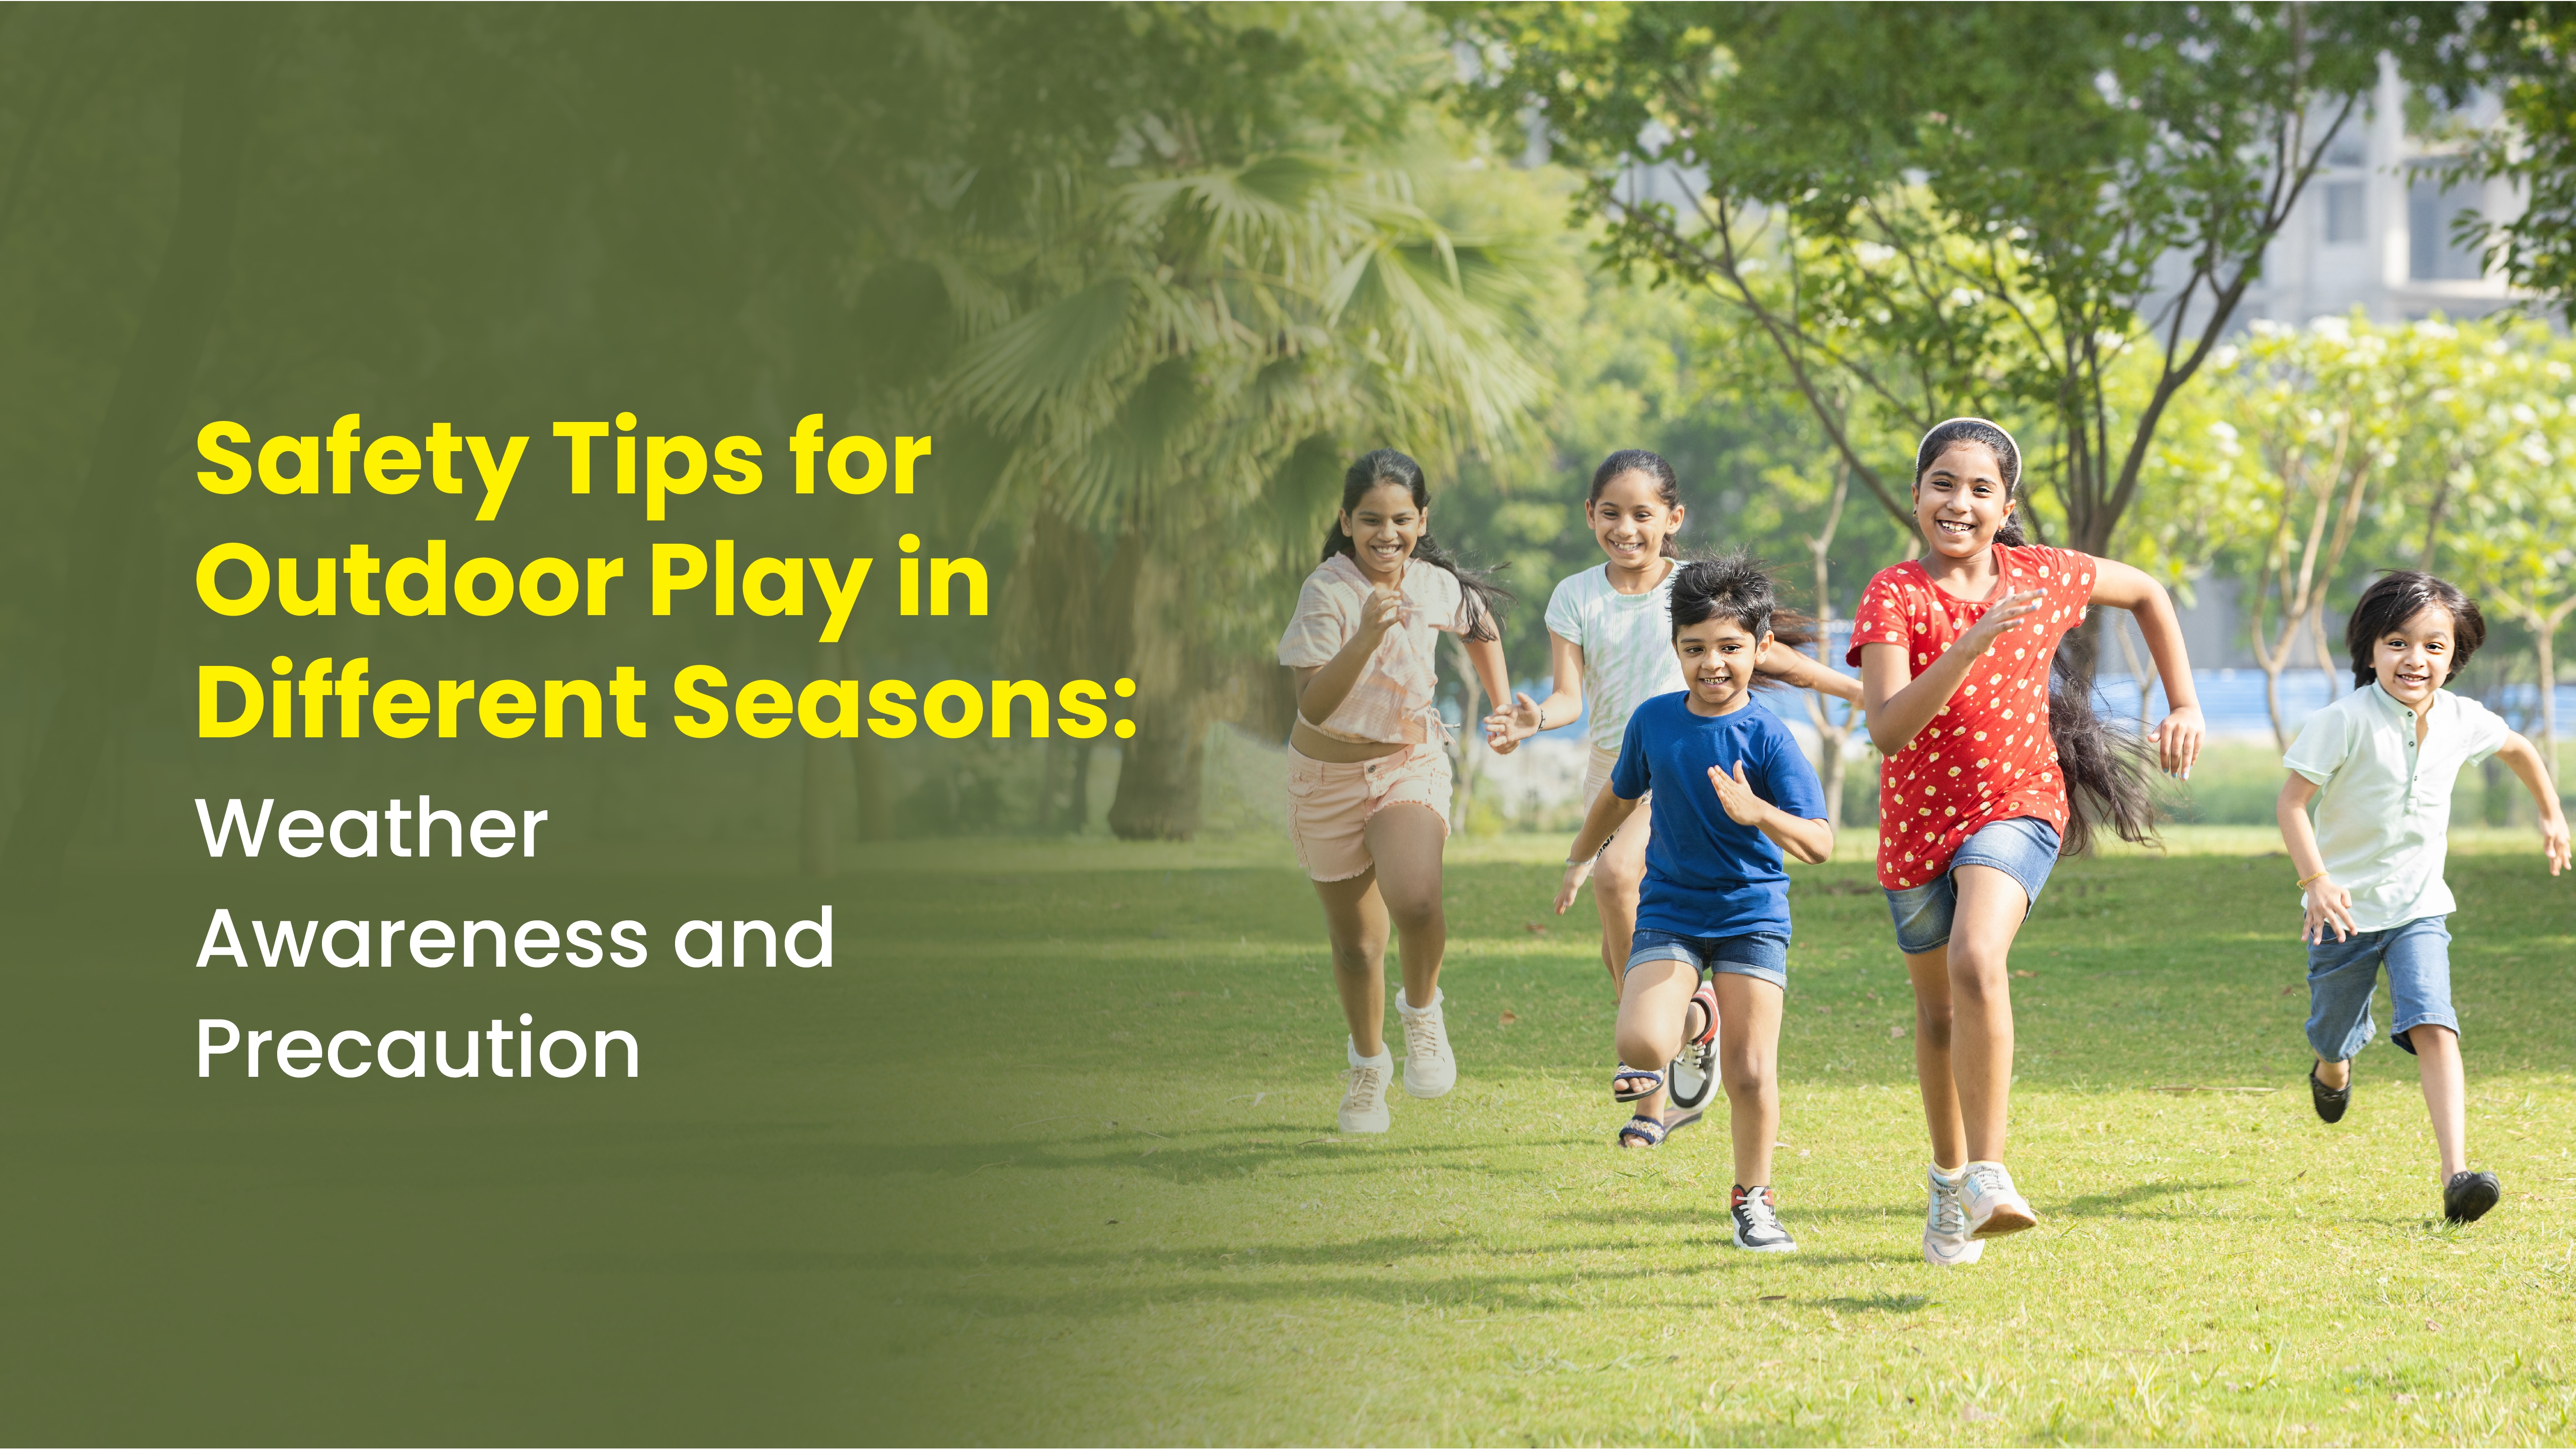 Safety Tips for Outdoor Play in Different Seasons: Weather Awareness and Precaution